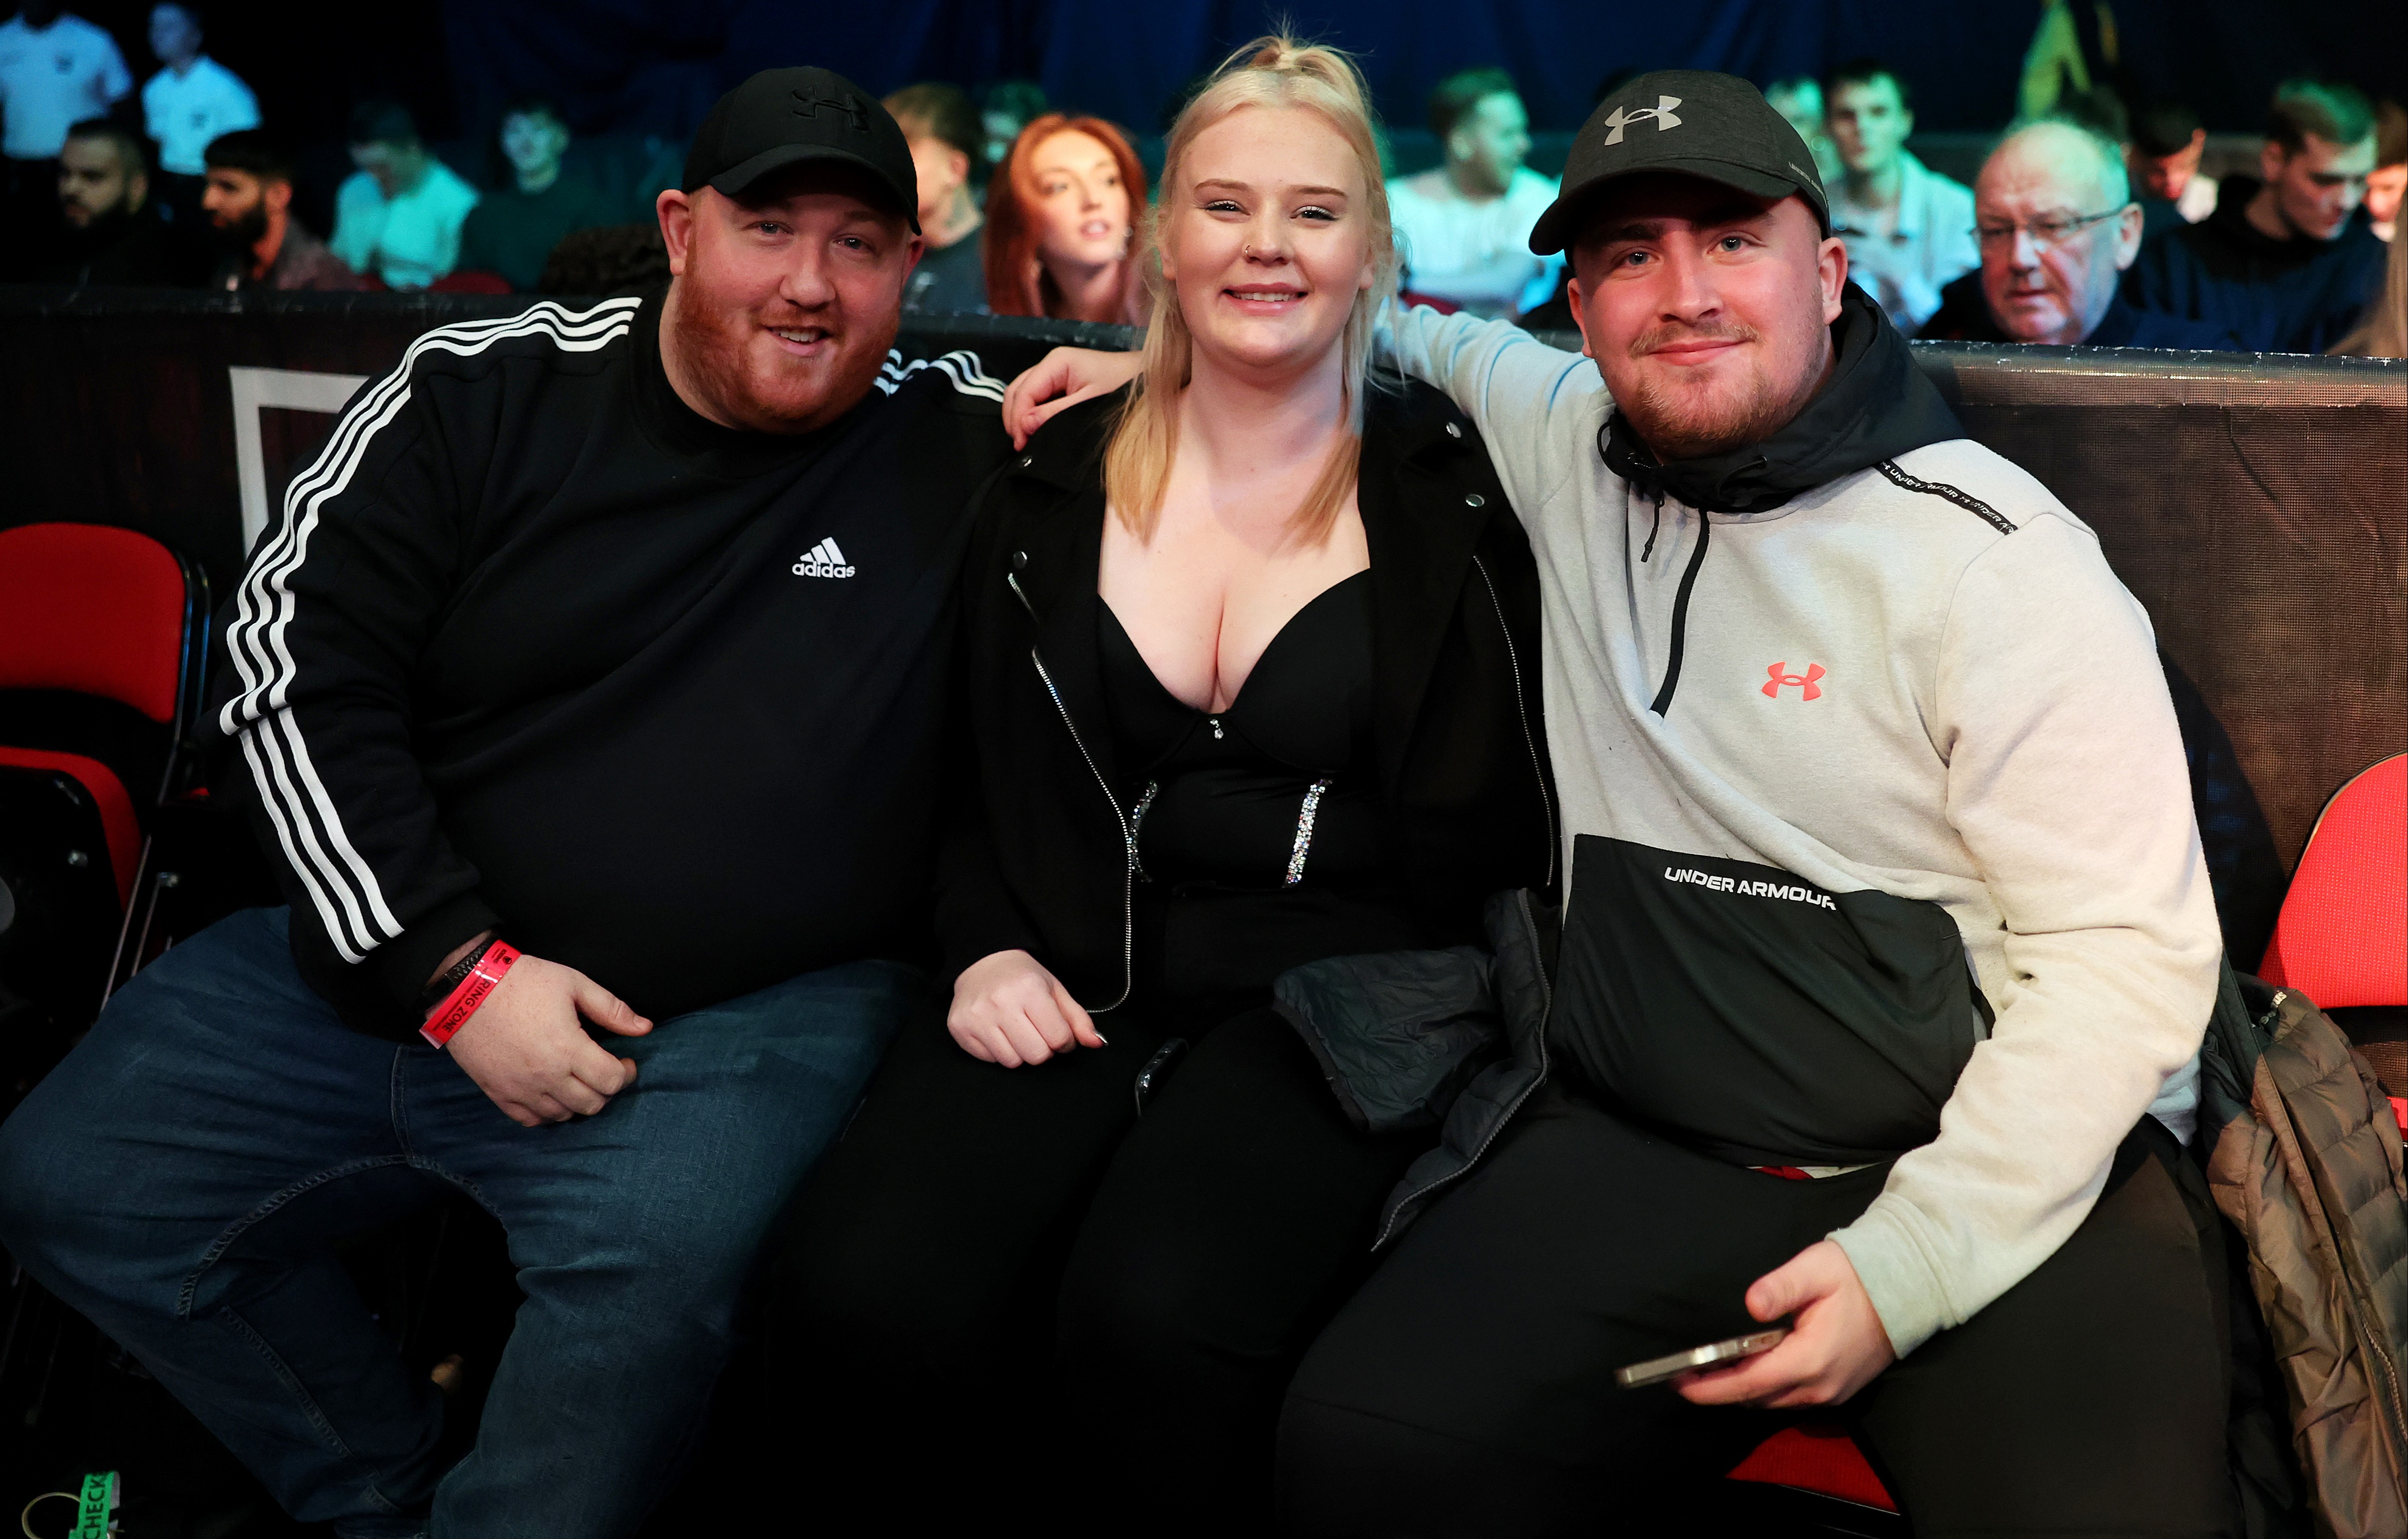 The darts wonderkid attended the event with girlfriend Eloise, centre